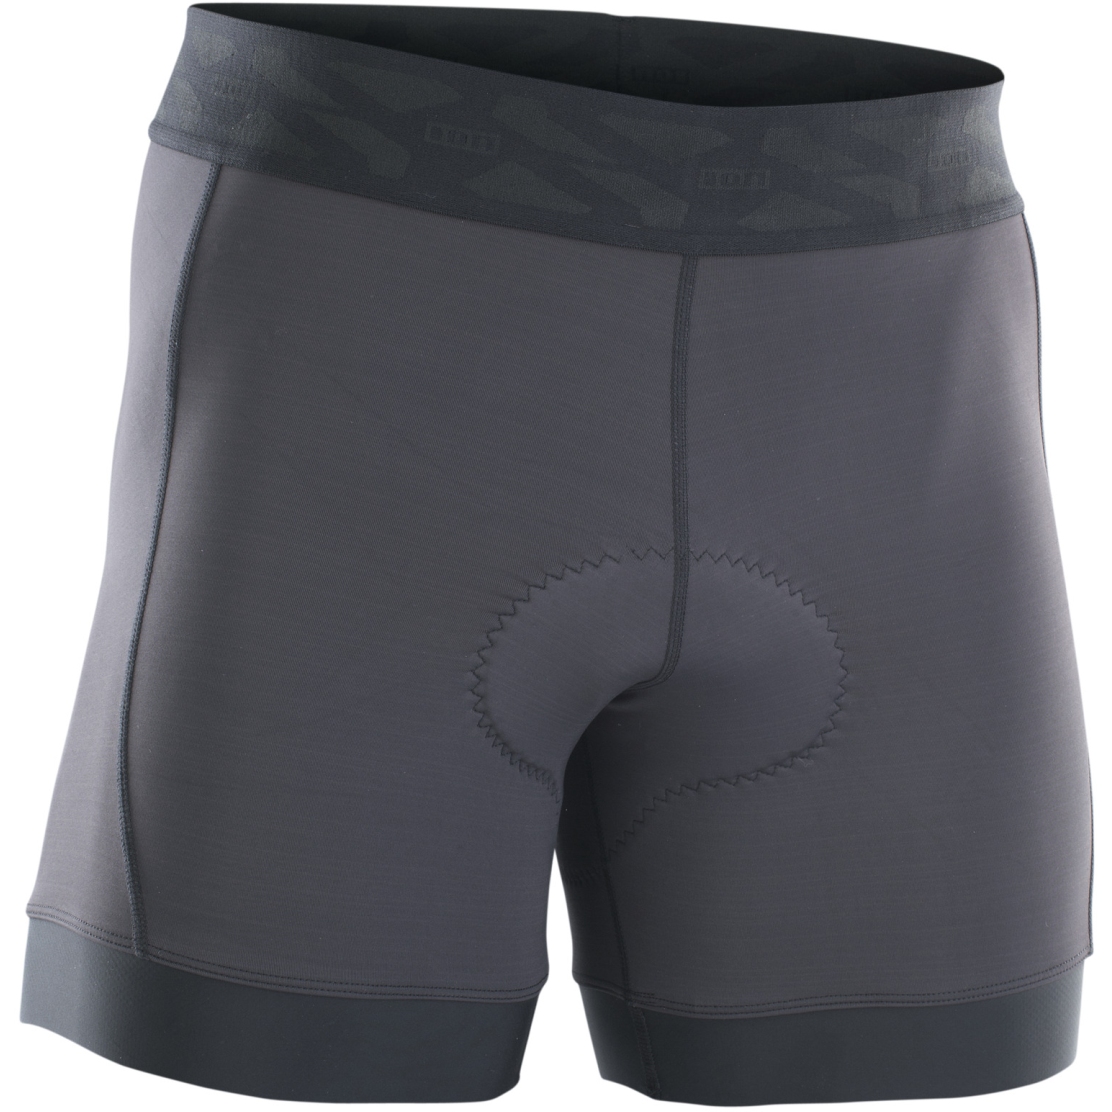 Picture of ION Bike Baselayer In-Shorts - Black 47232